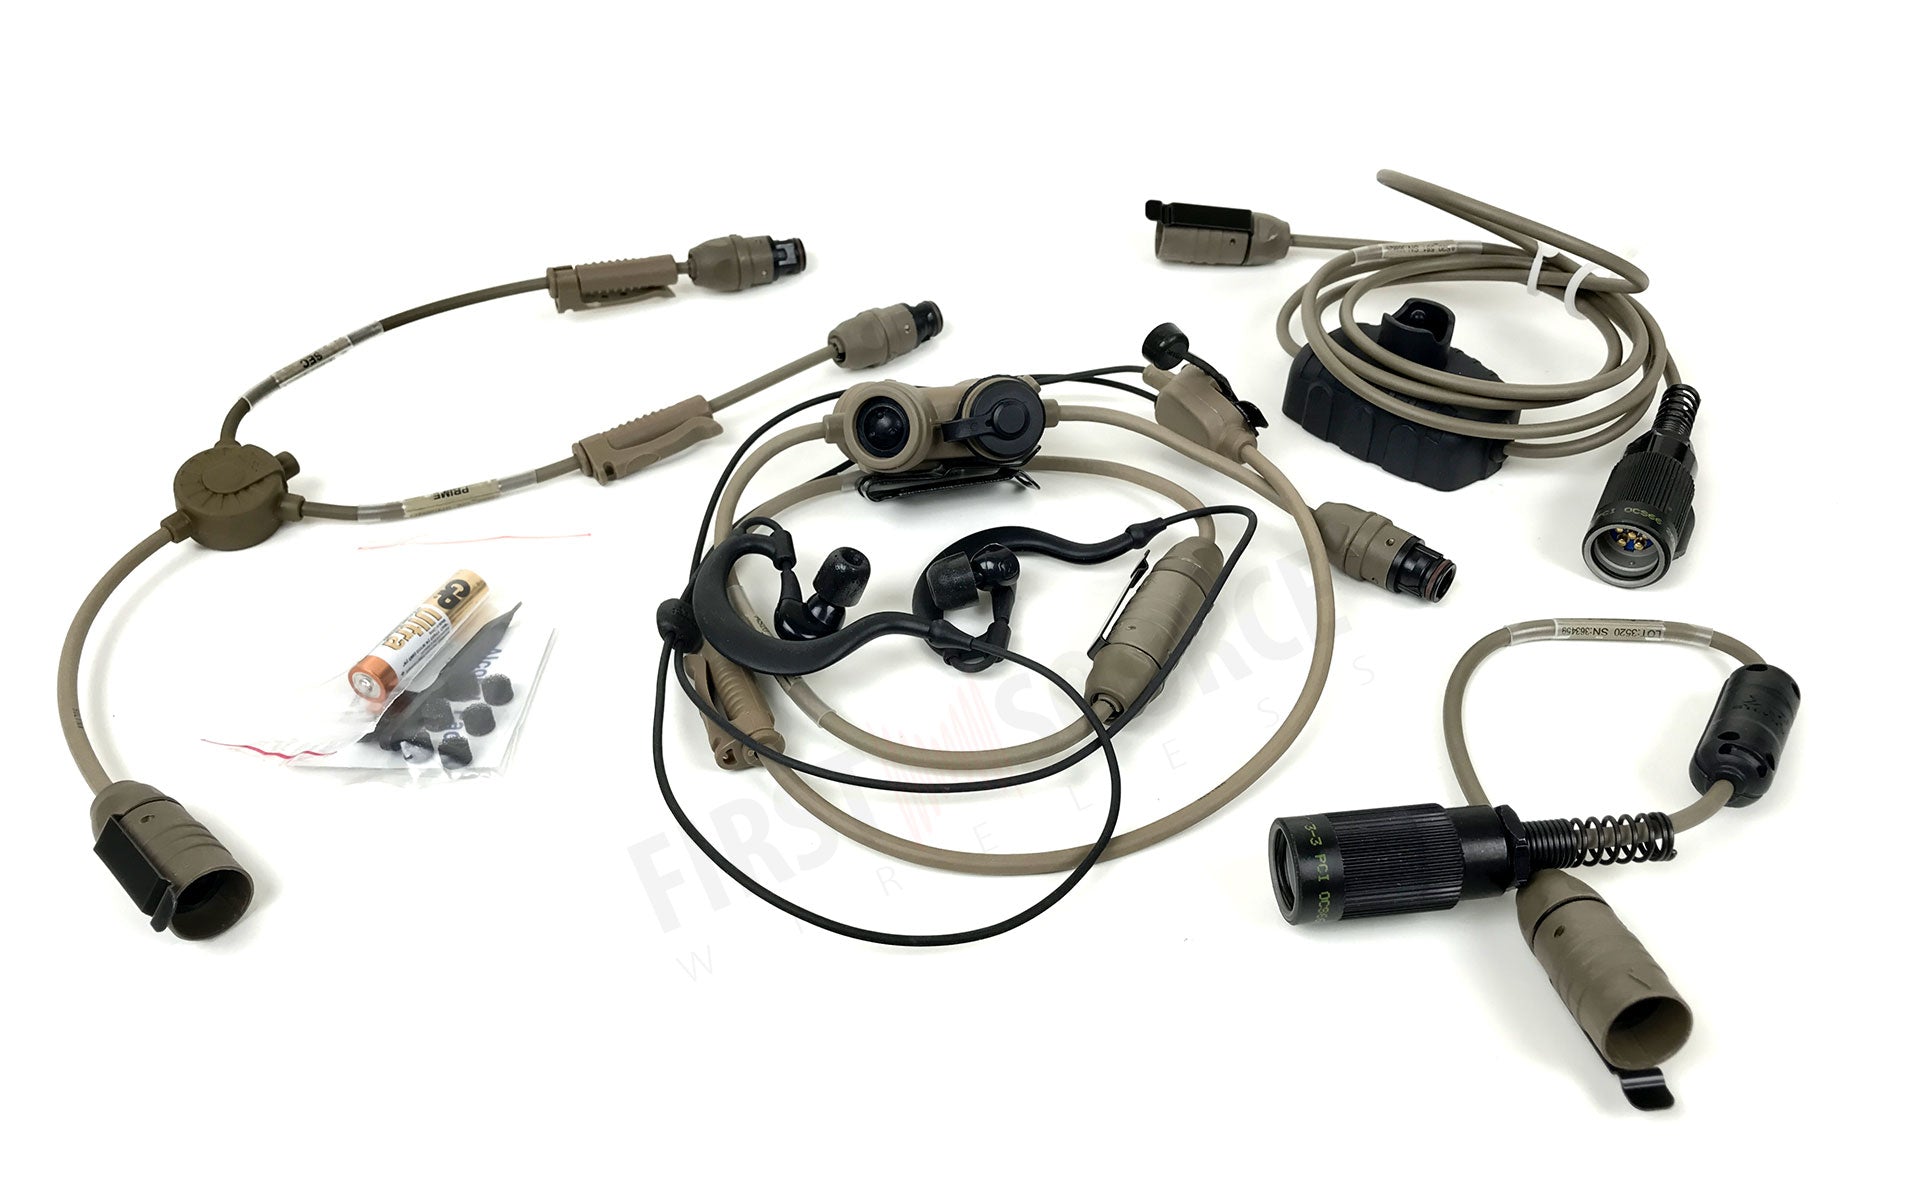 In-Ear Tactical Communications Clarus Pro Headset, Dual Comm, For Vehicle Intercom System Military Use